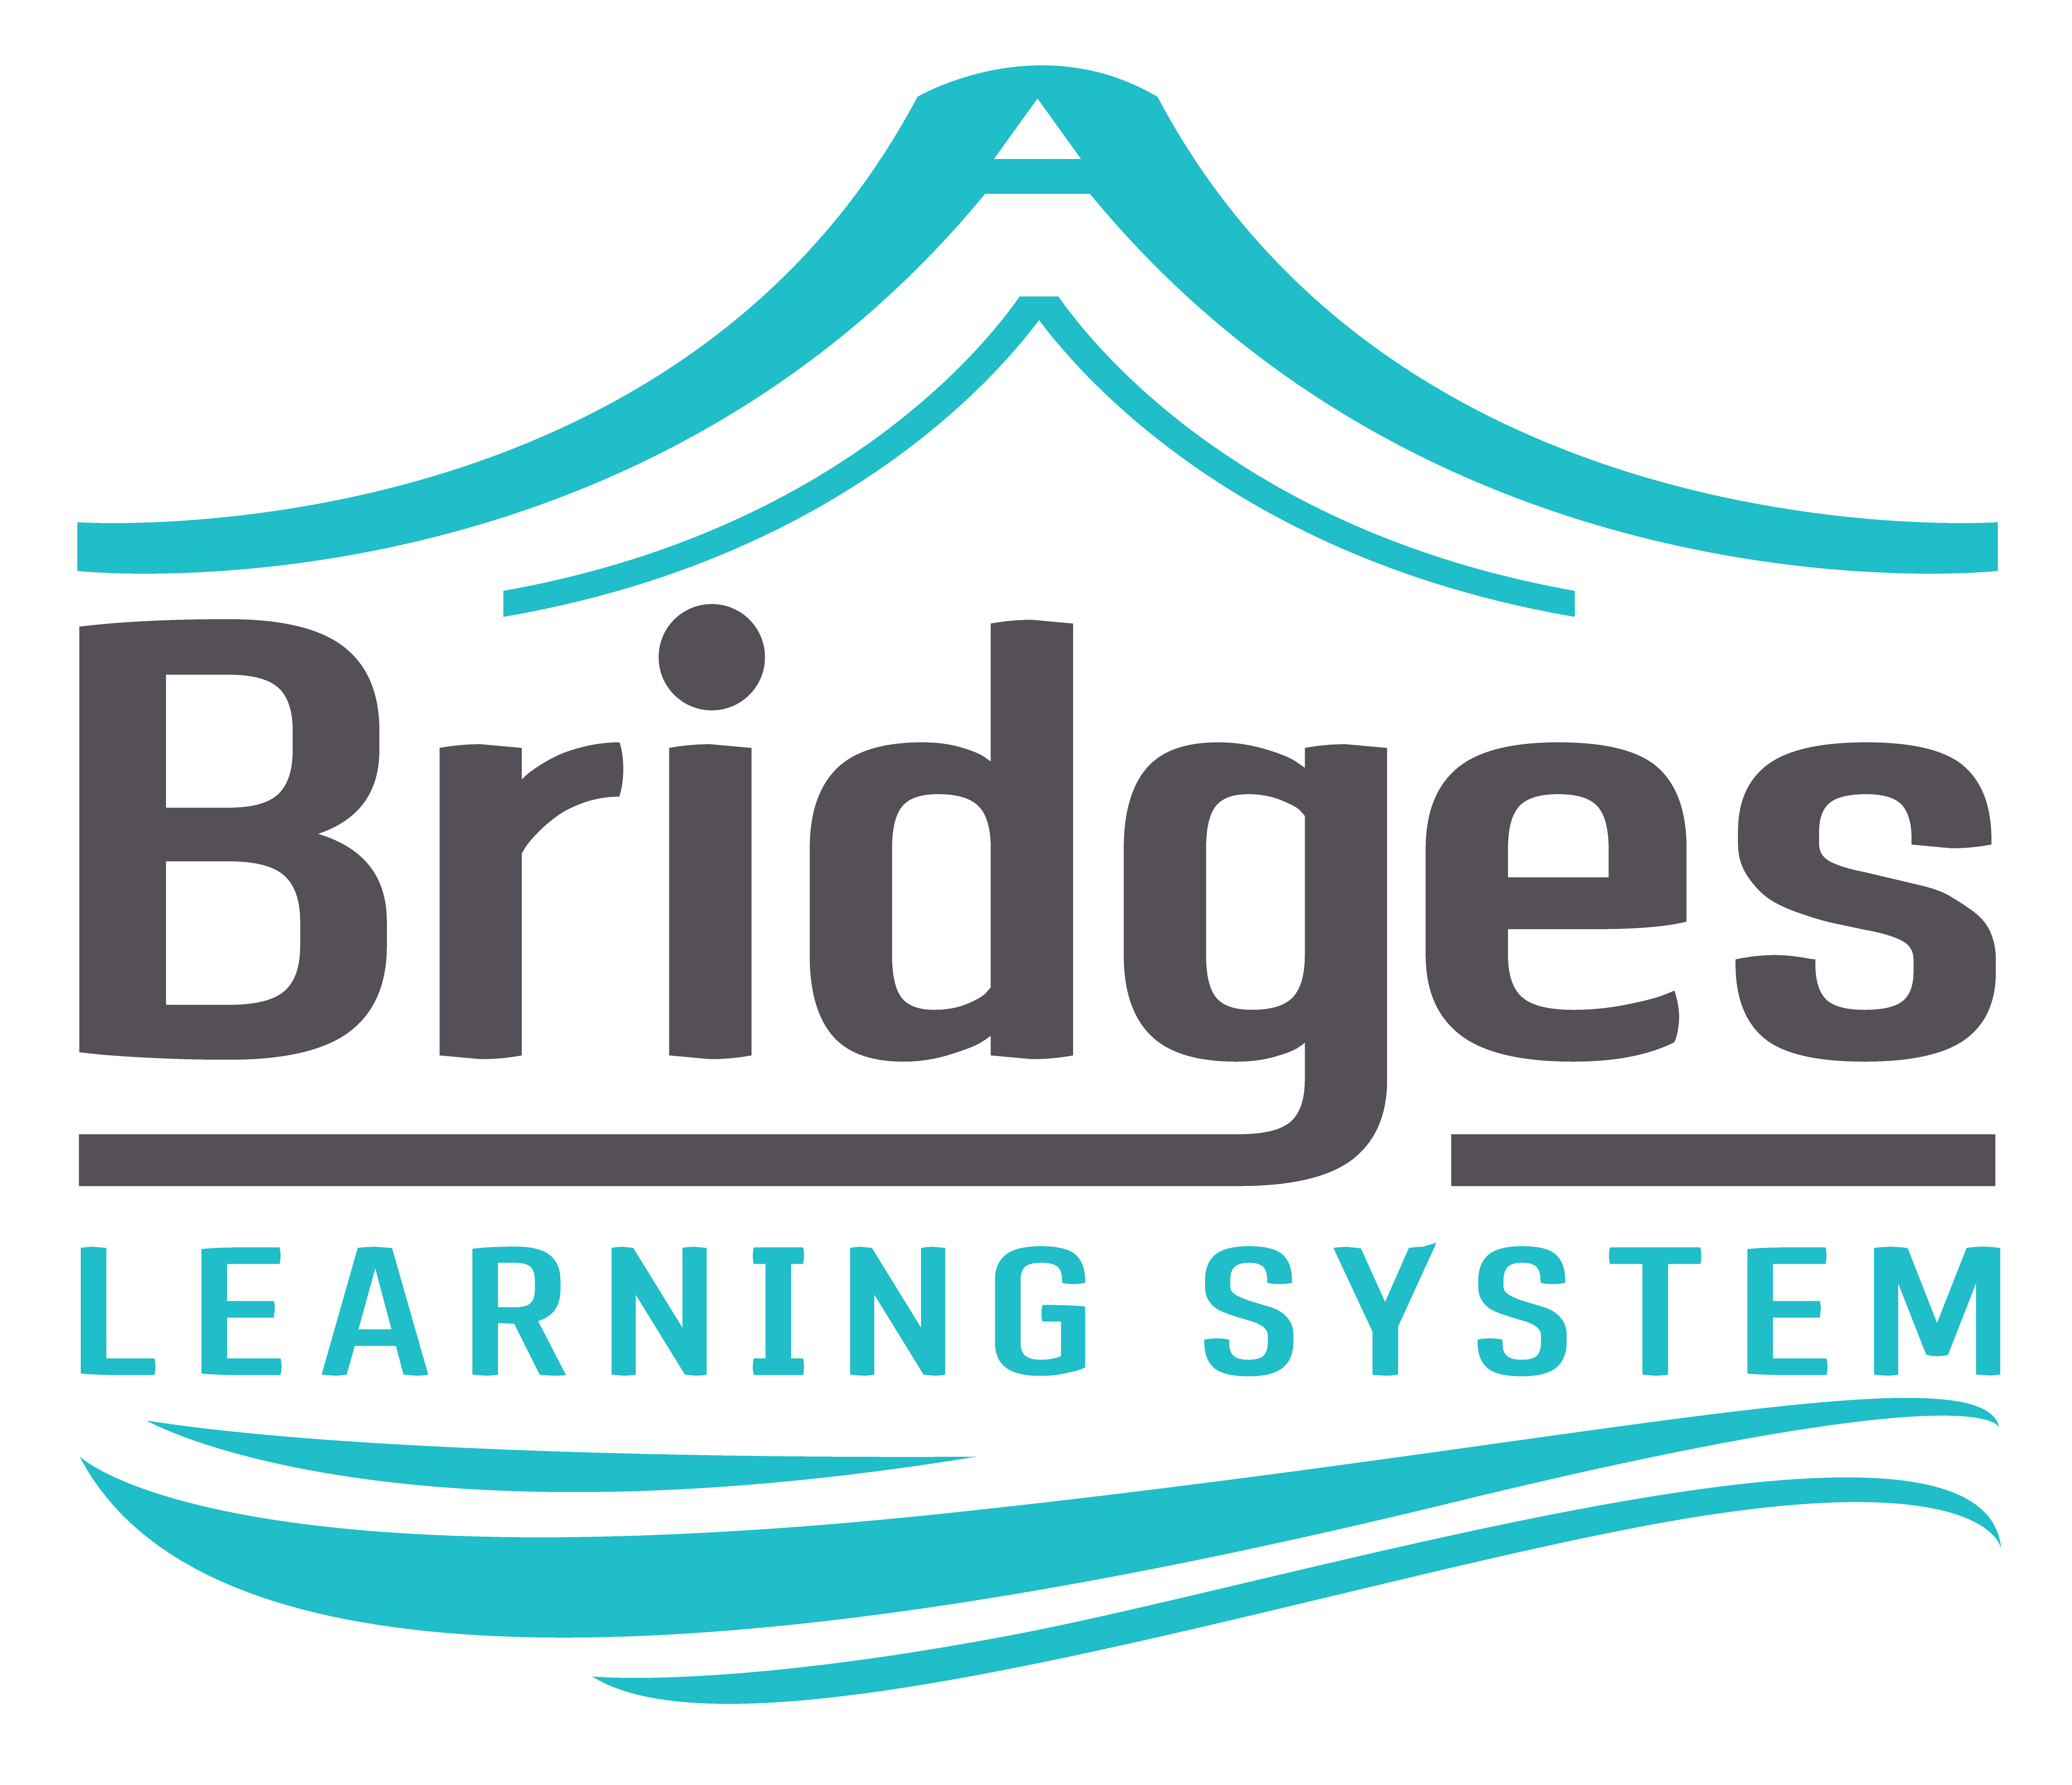 The Bridges Learning System logo with an arched bridge over the text